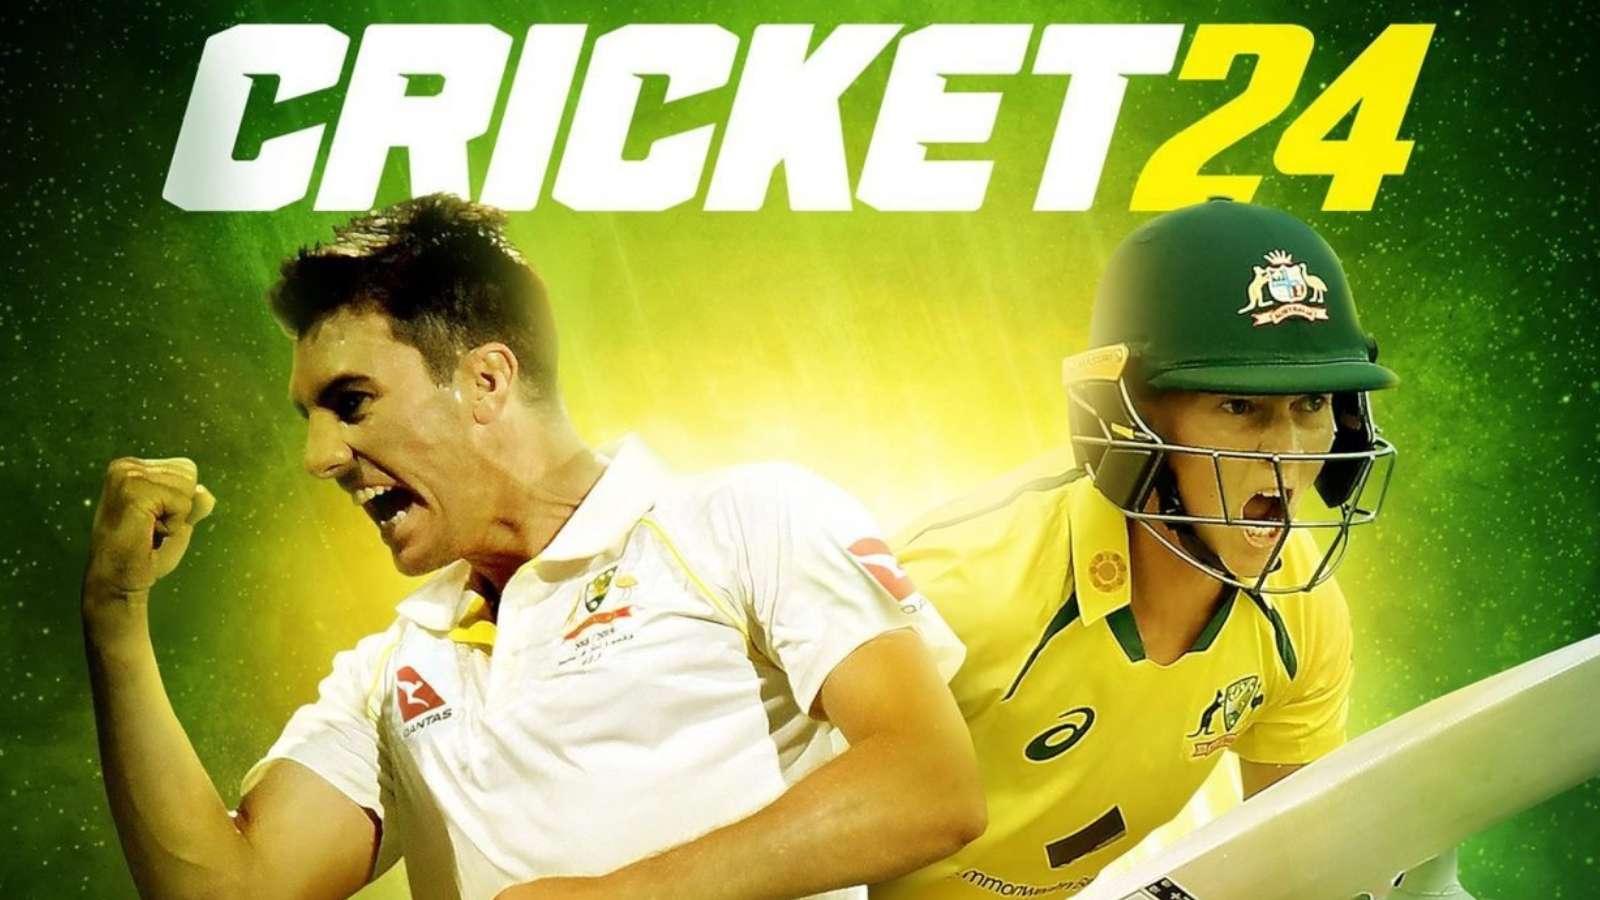 official Cricket 24 cover